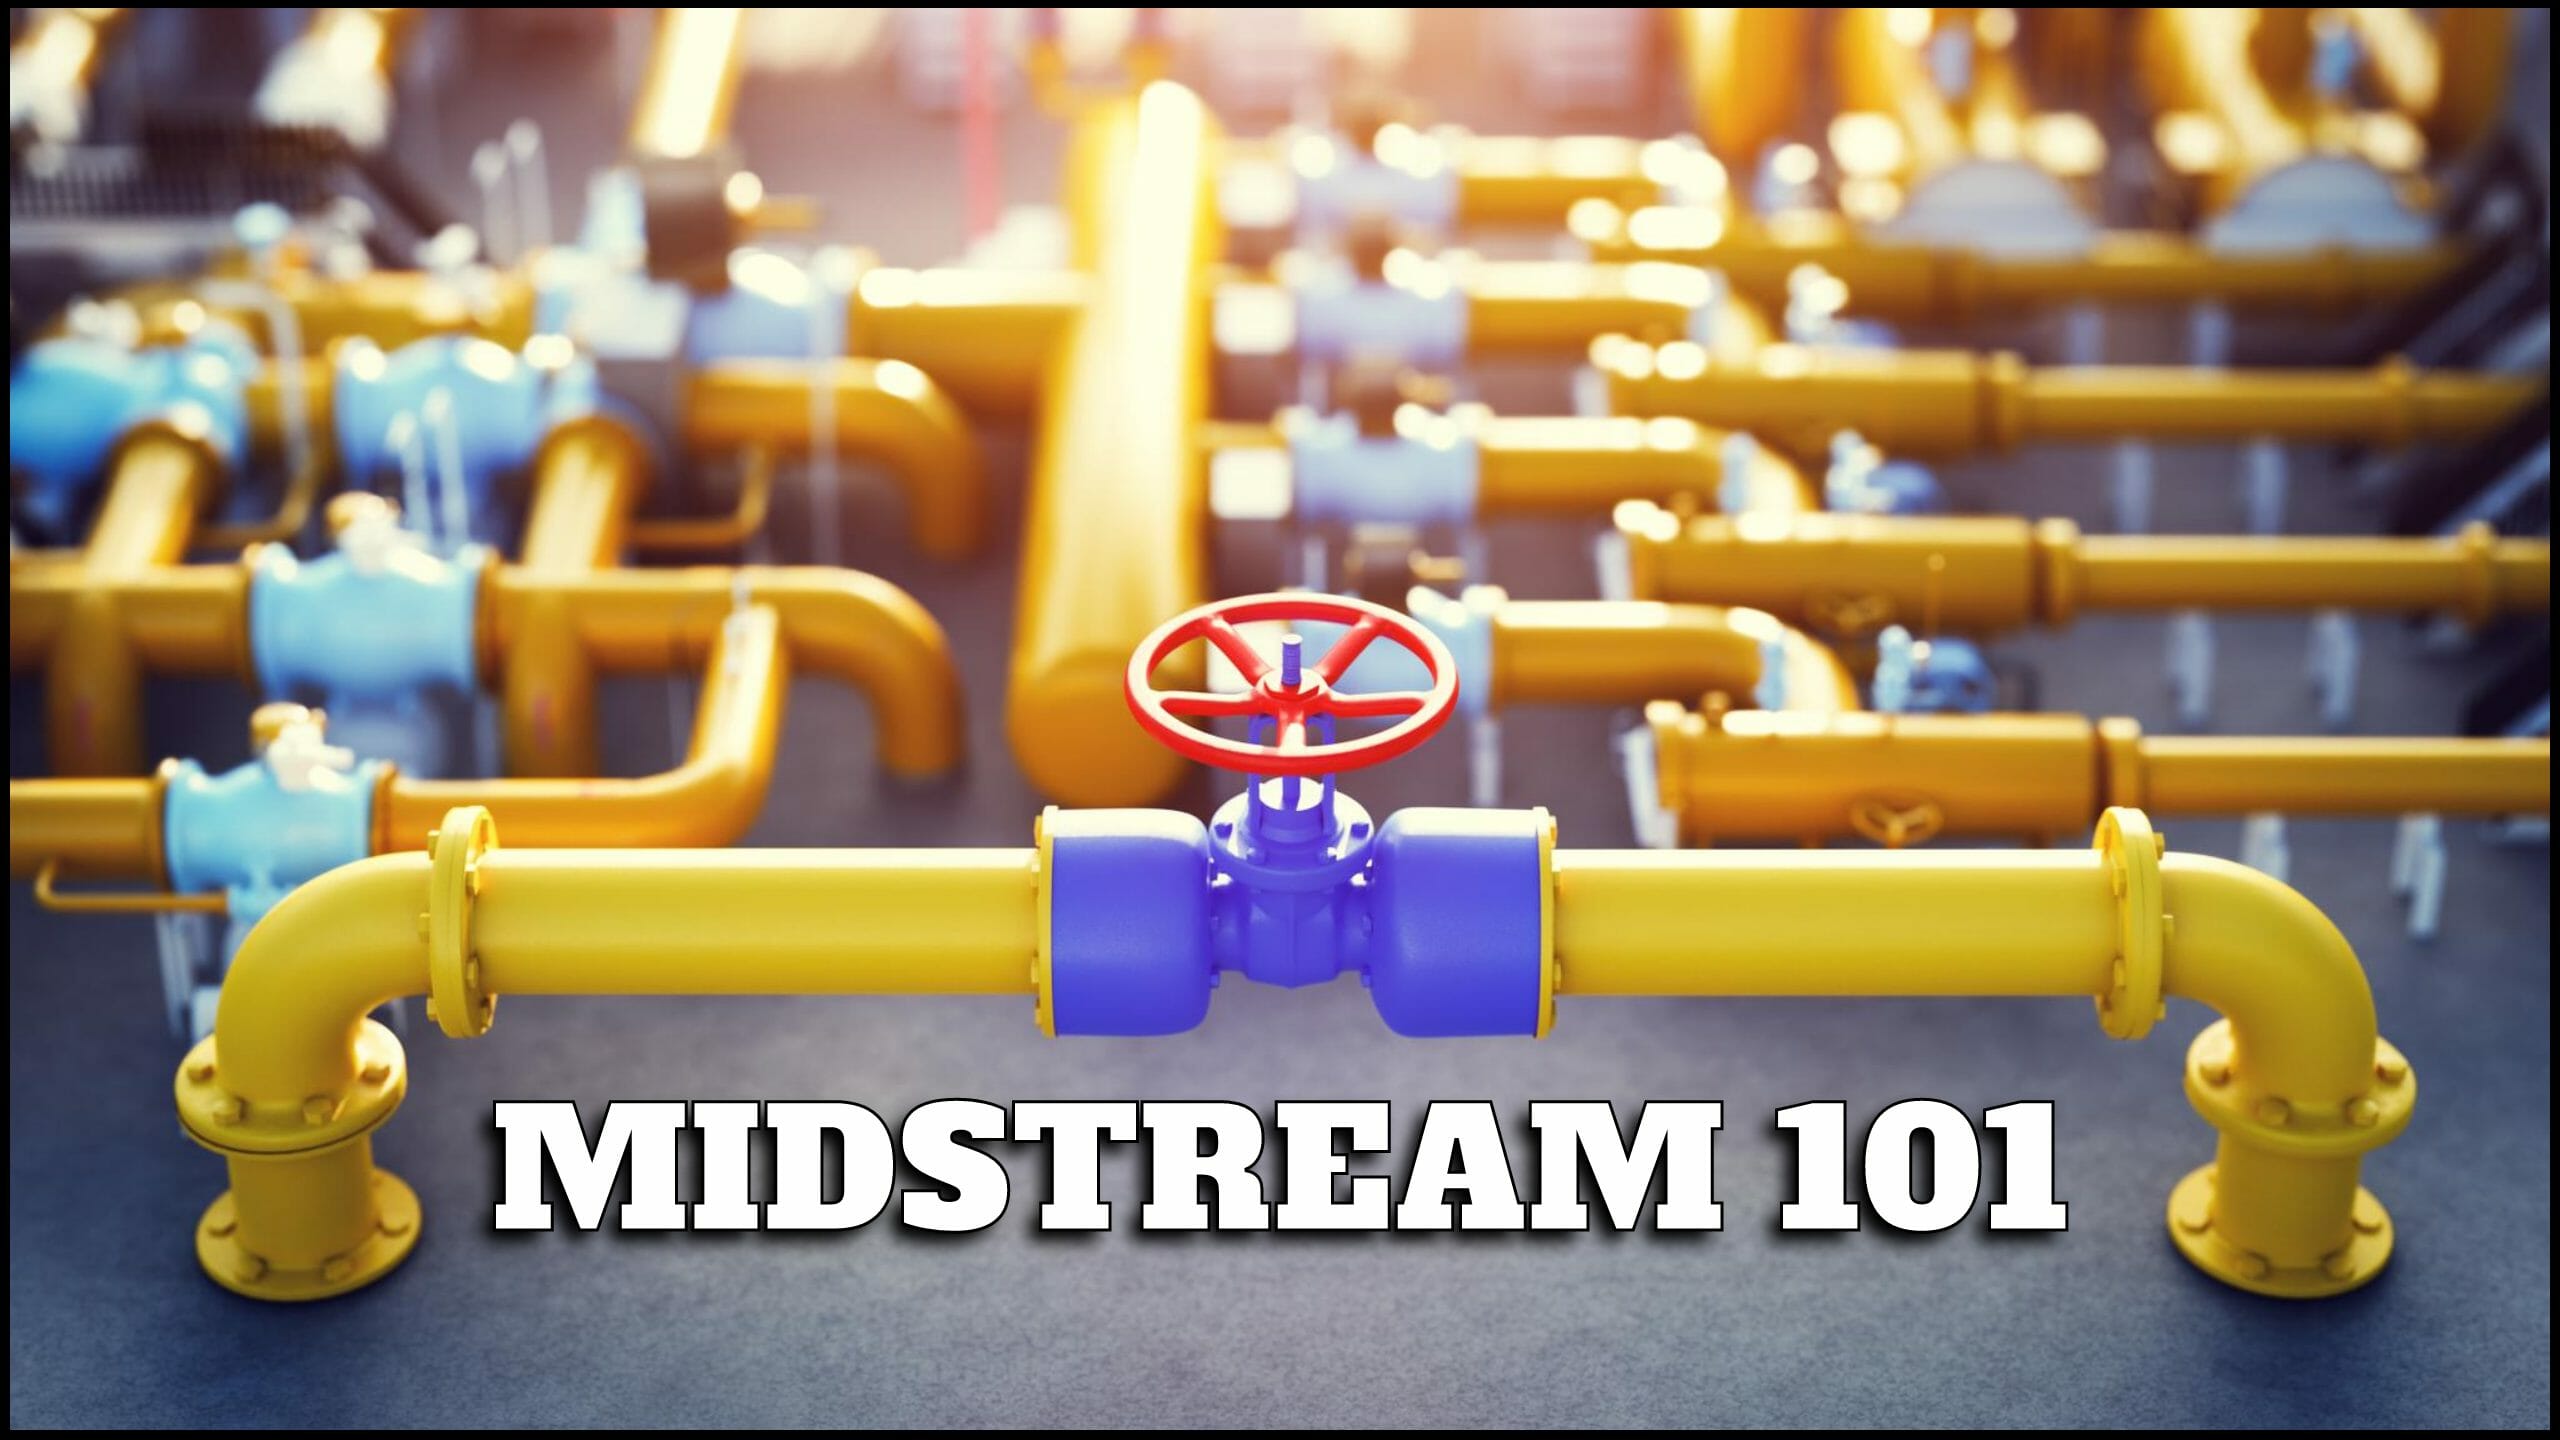 2023 Midstream News in Pipeline and Gas Processing